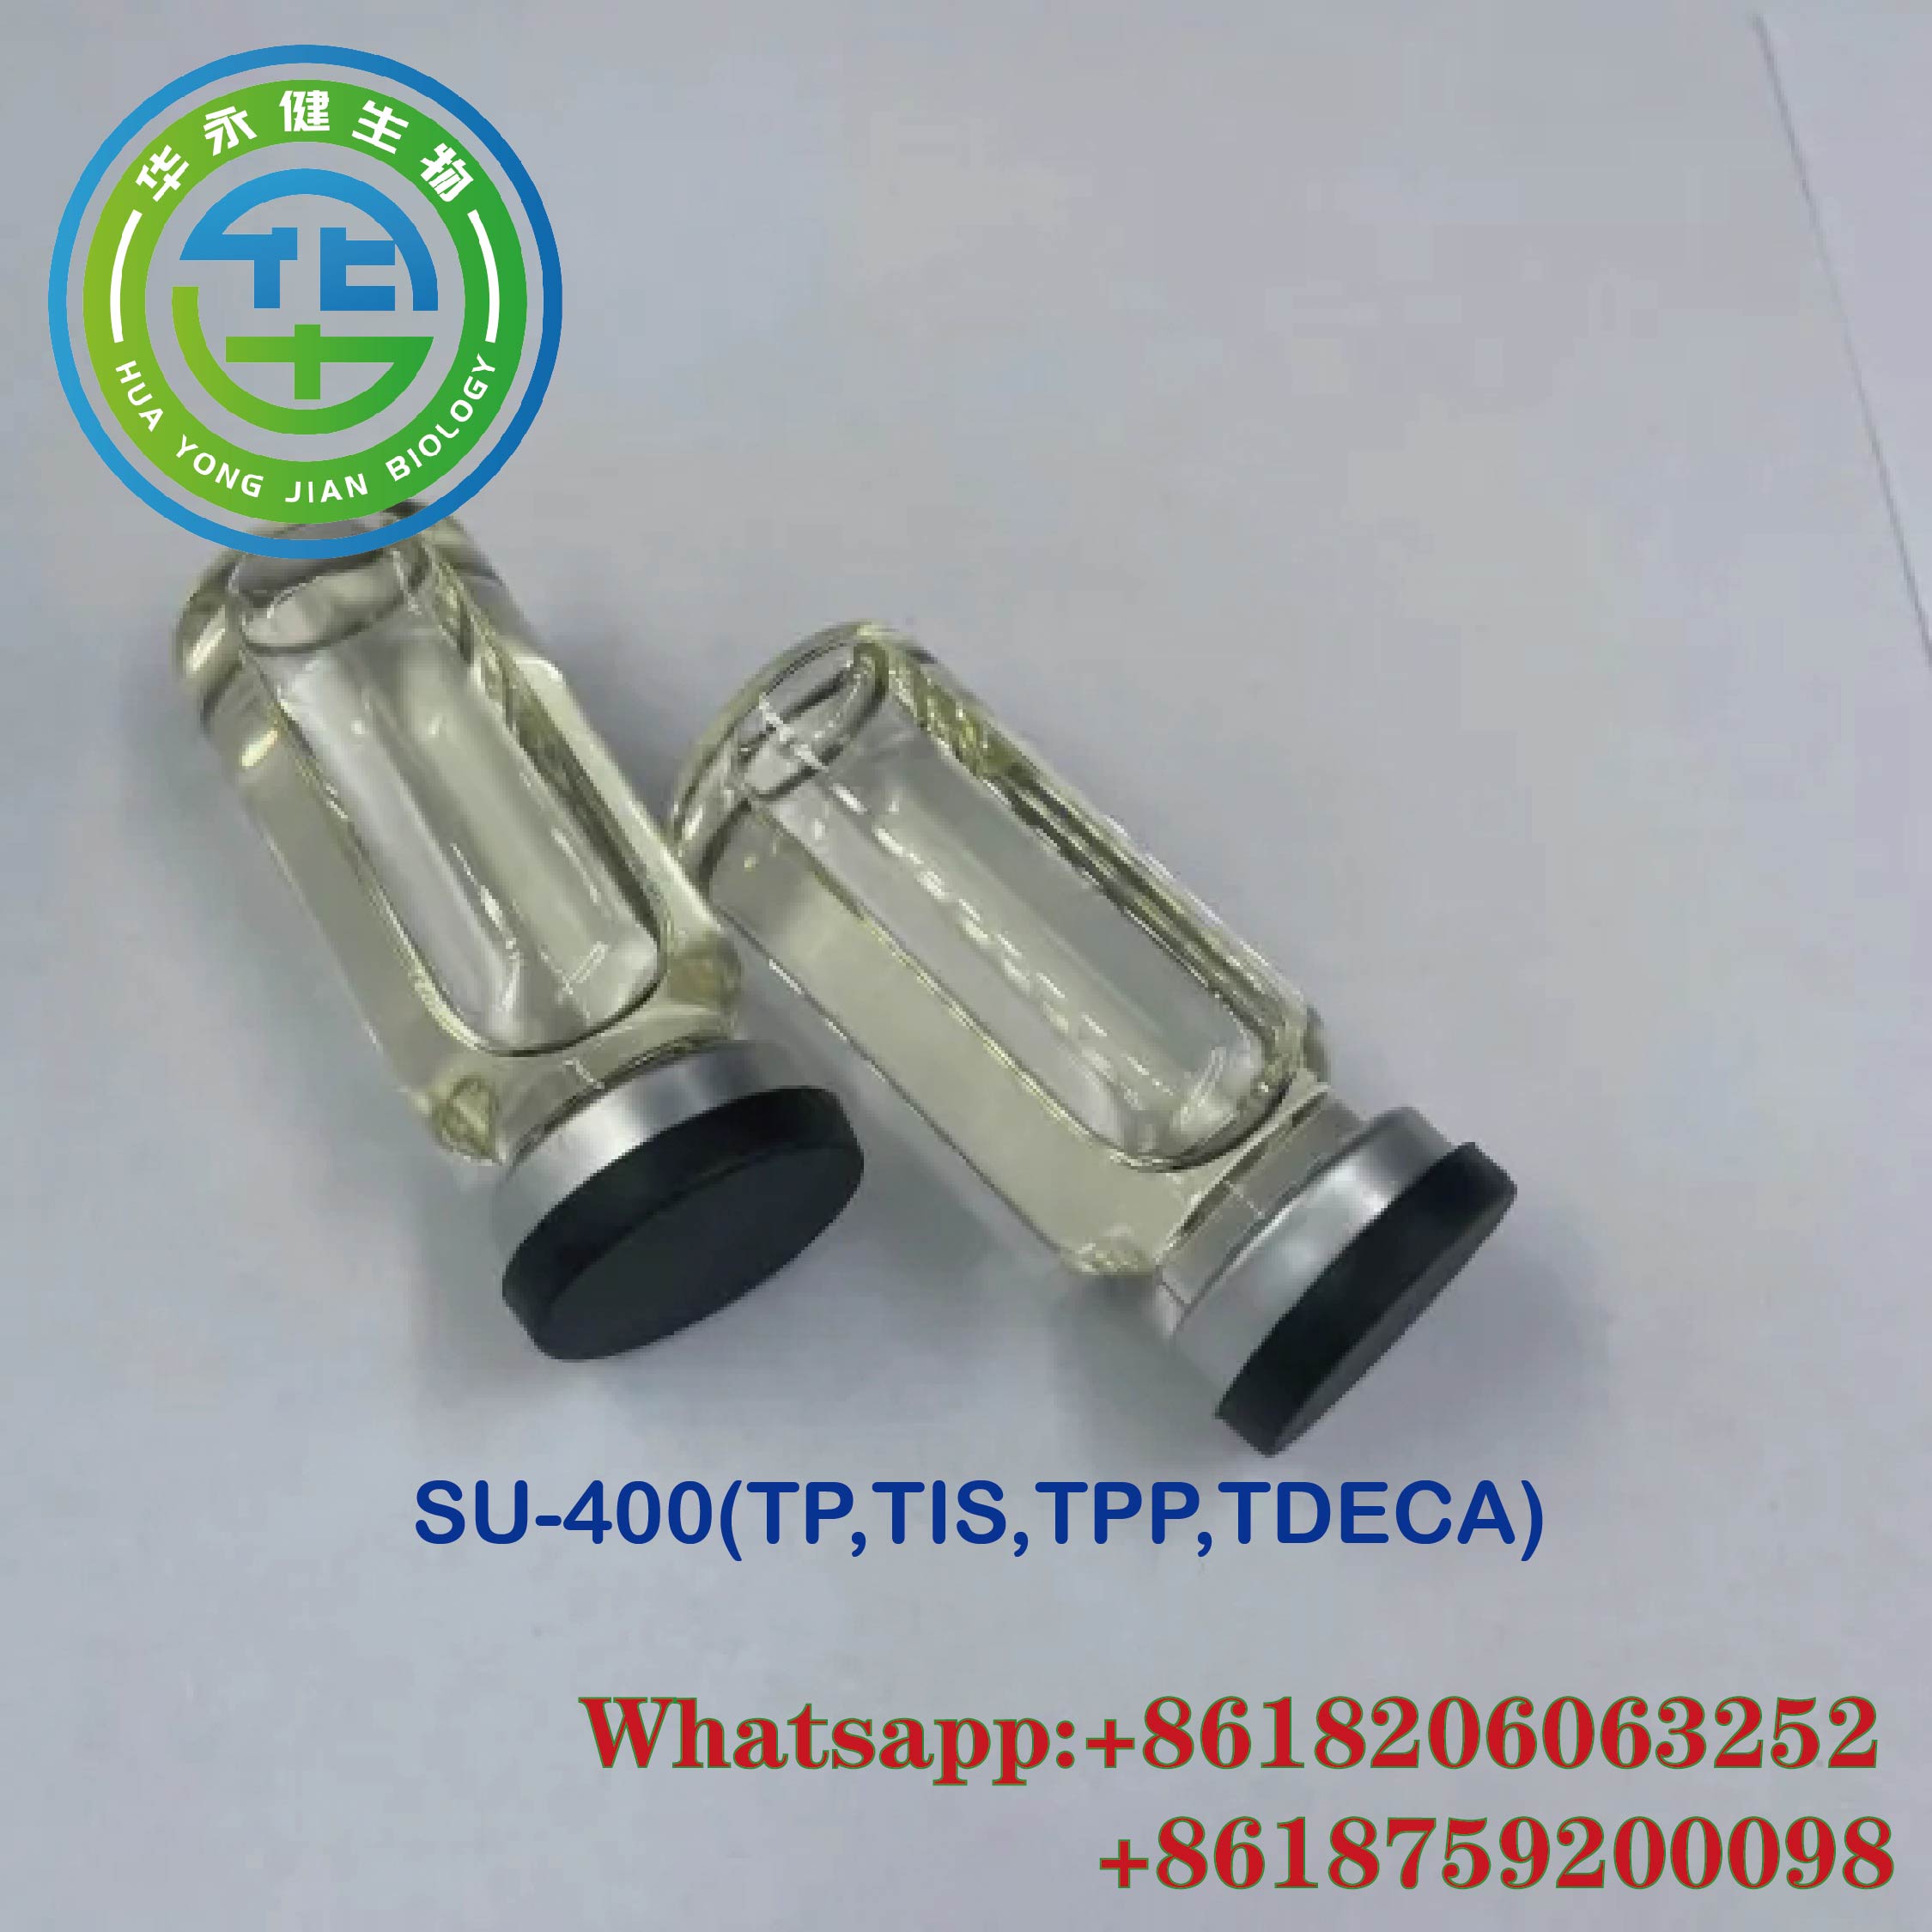 Wholesale Price Top Purity Testosterone Sustanon 400mg/ml Hormone Oil Finished Steroids Semi Finished Oil SU-400 Featured Image